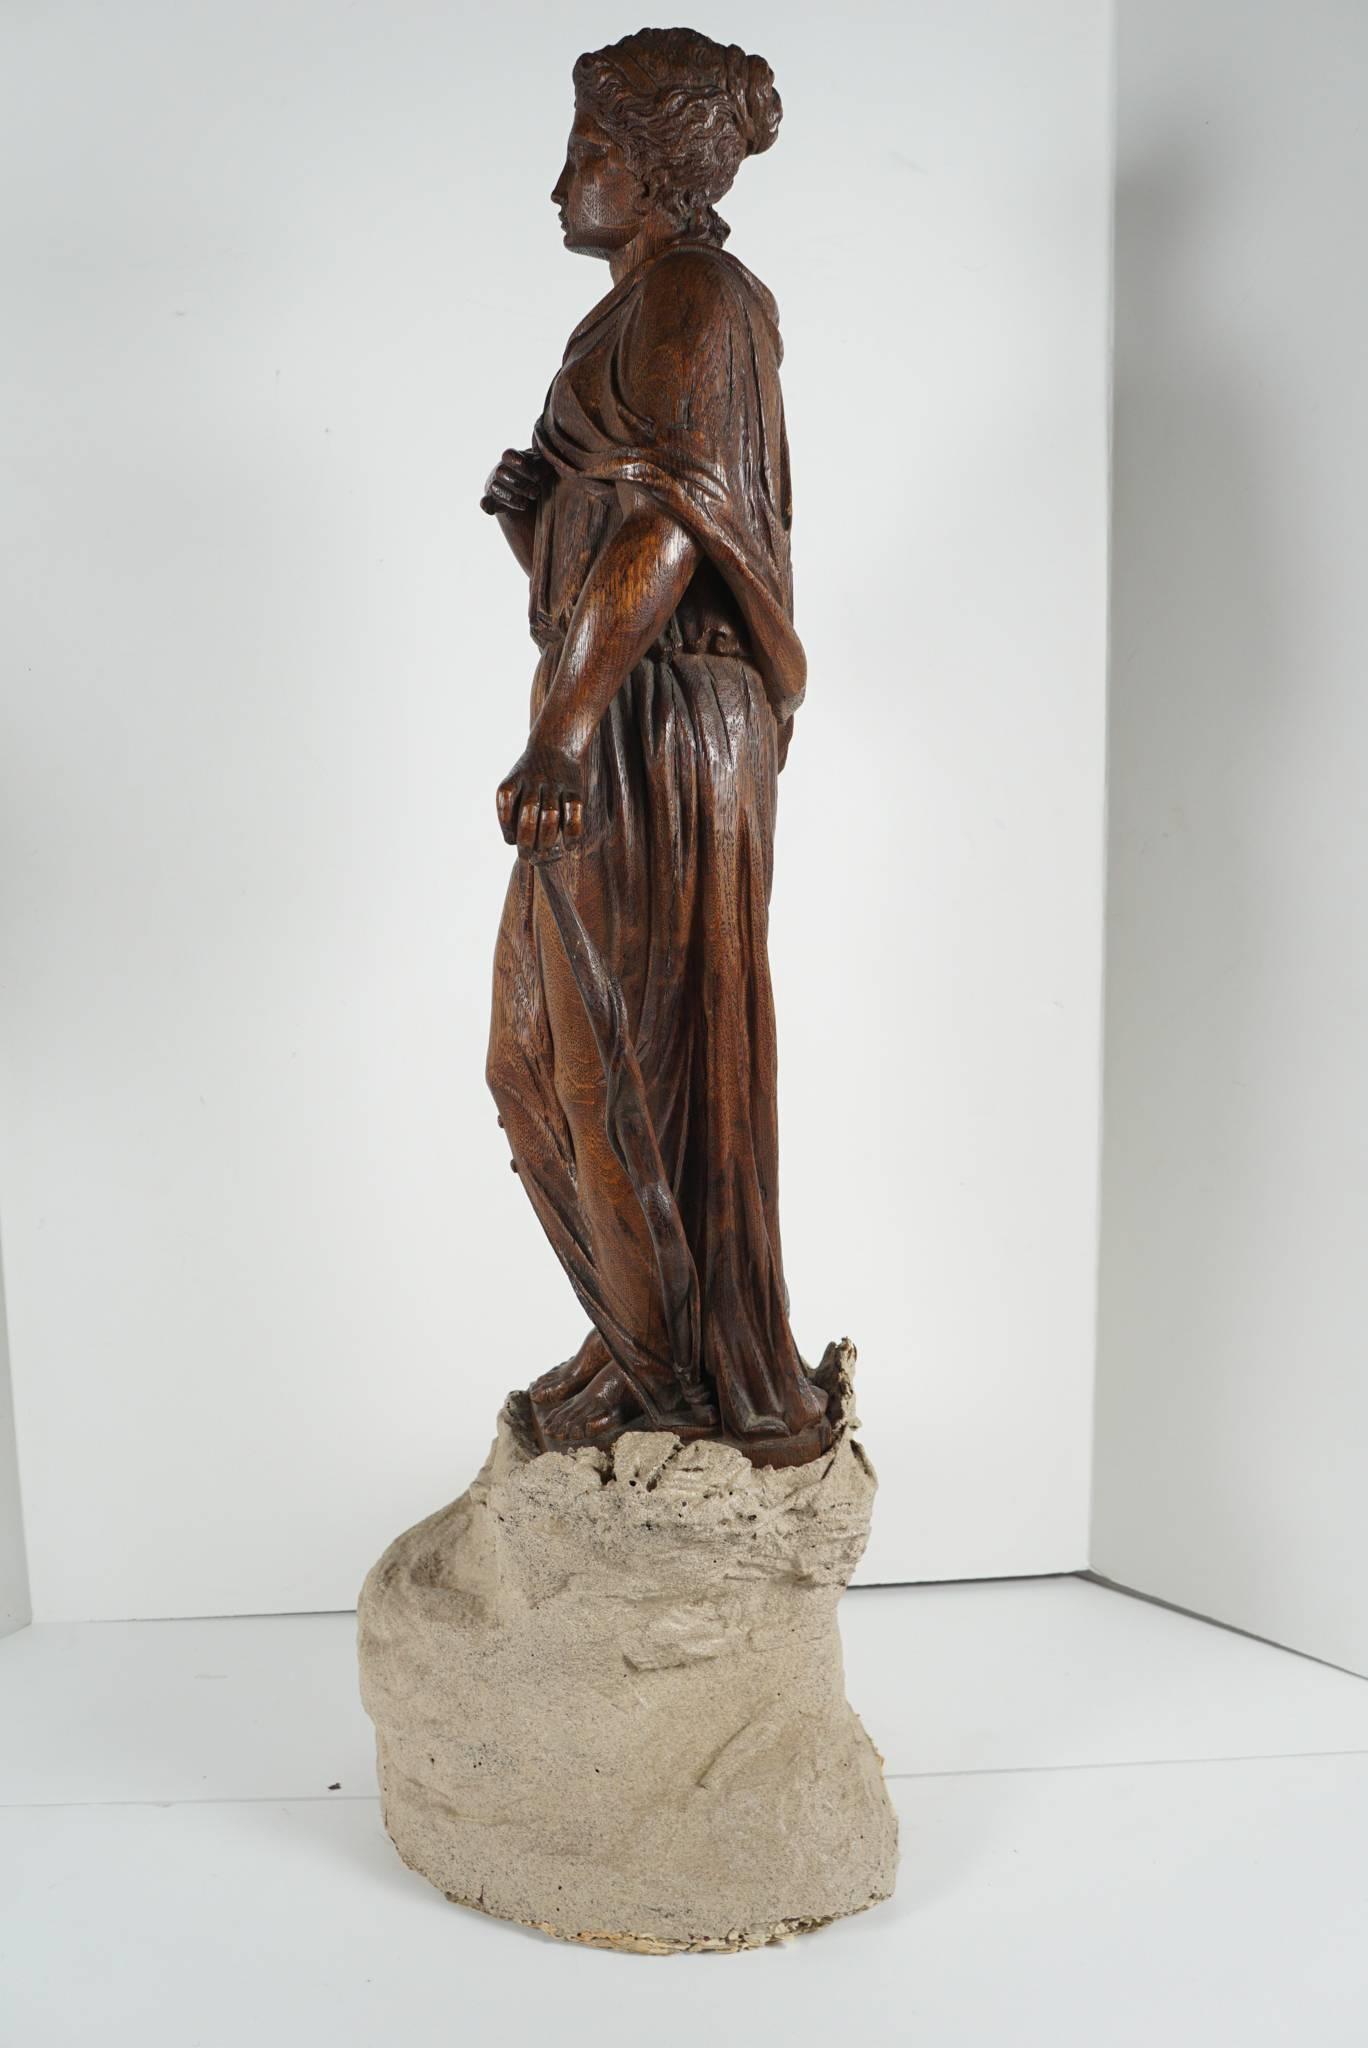 This figure carved to represent Diana the goddess of the hunt comes complete with bow. Carved in a Baroque revival style in France circa 1880 she may have once been a newel post finial. The carving has a large wooden section designed to set down